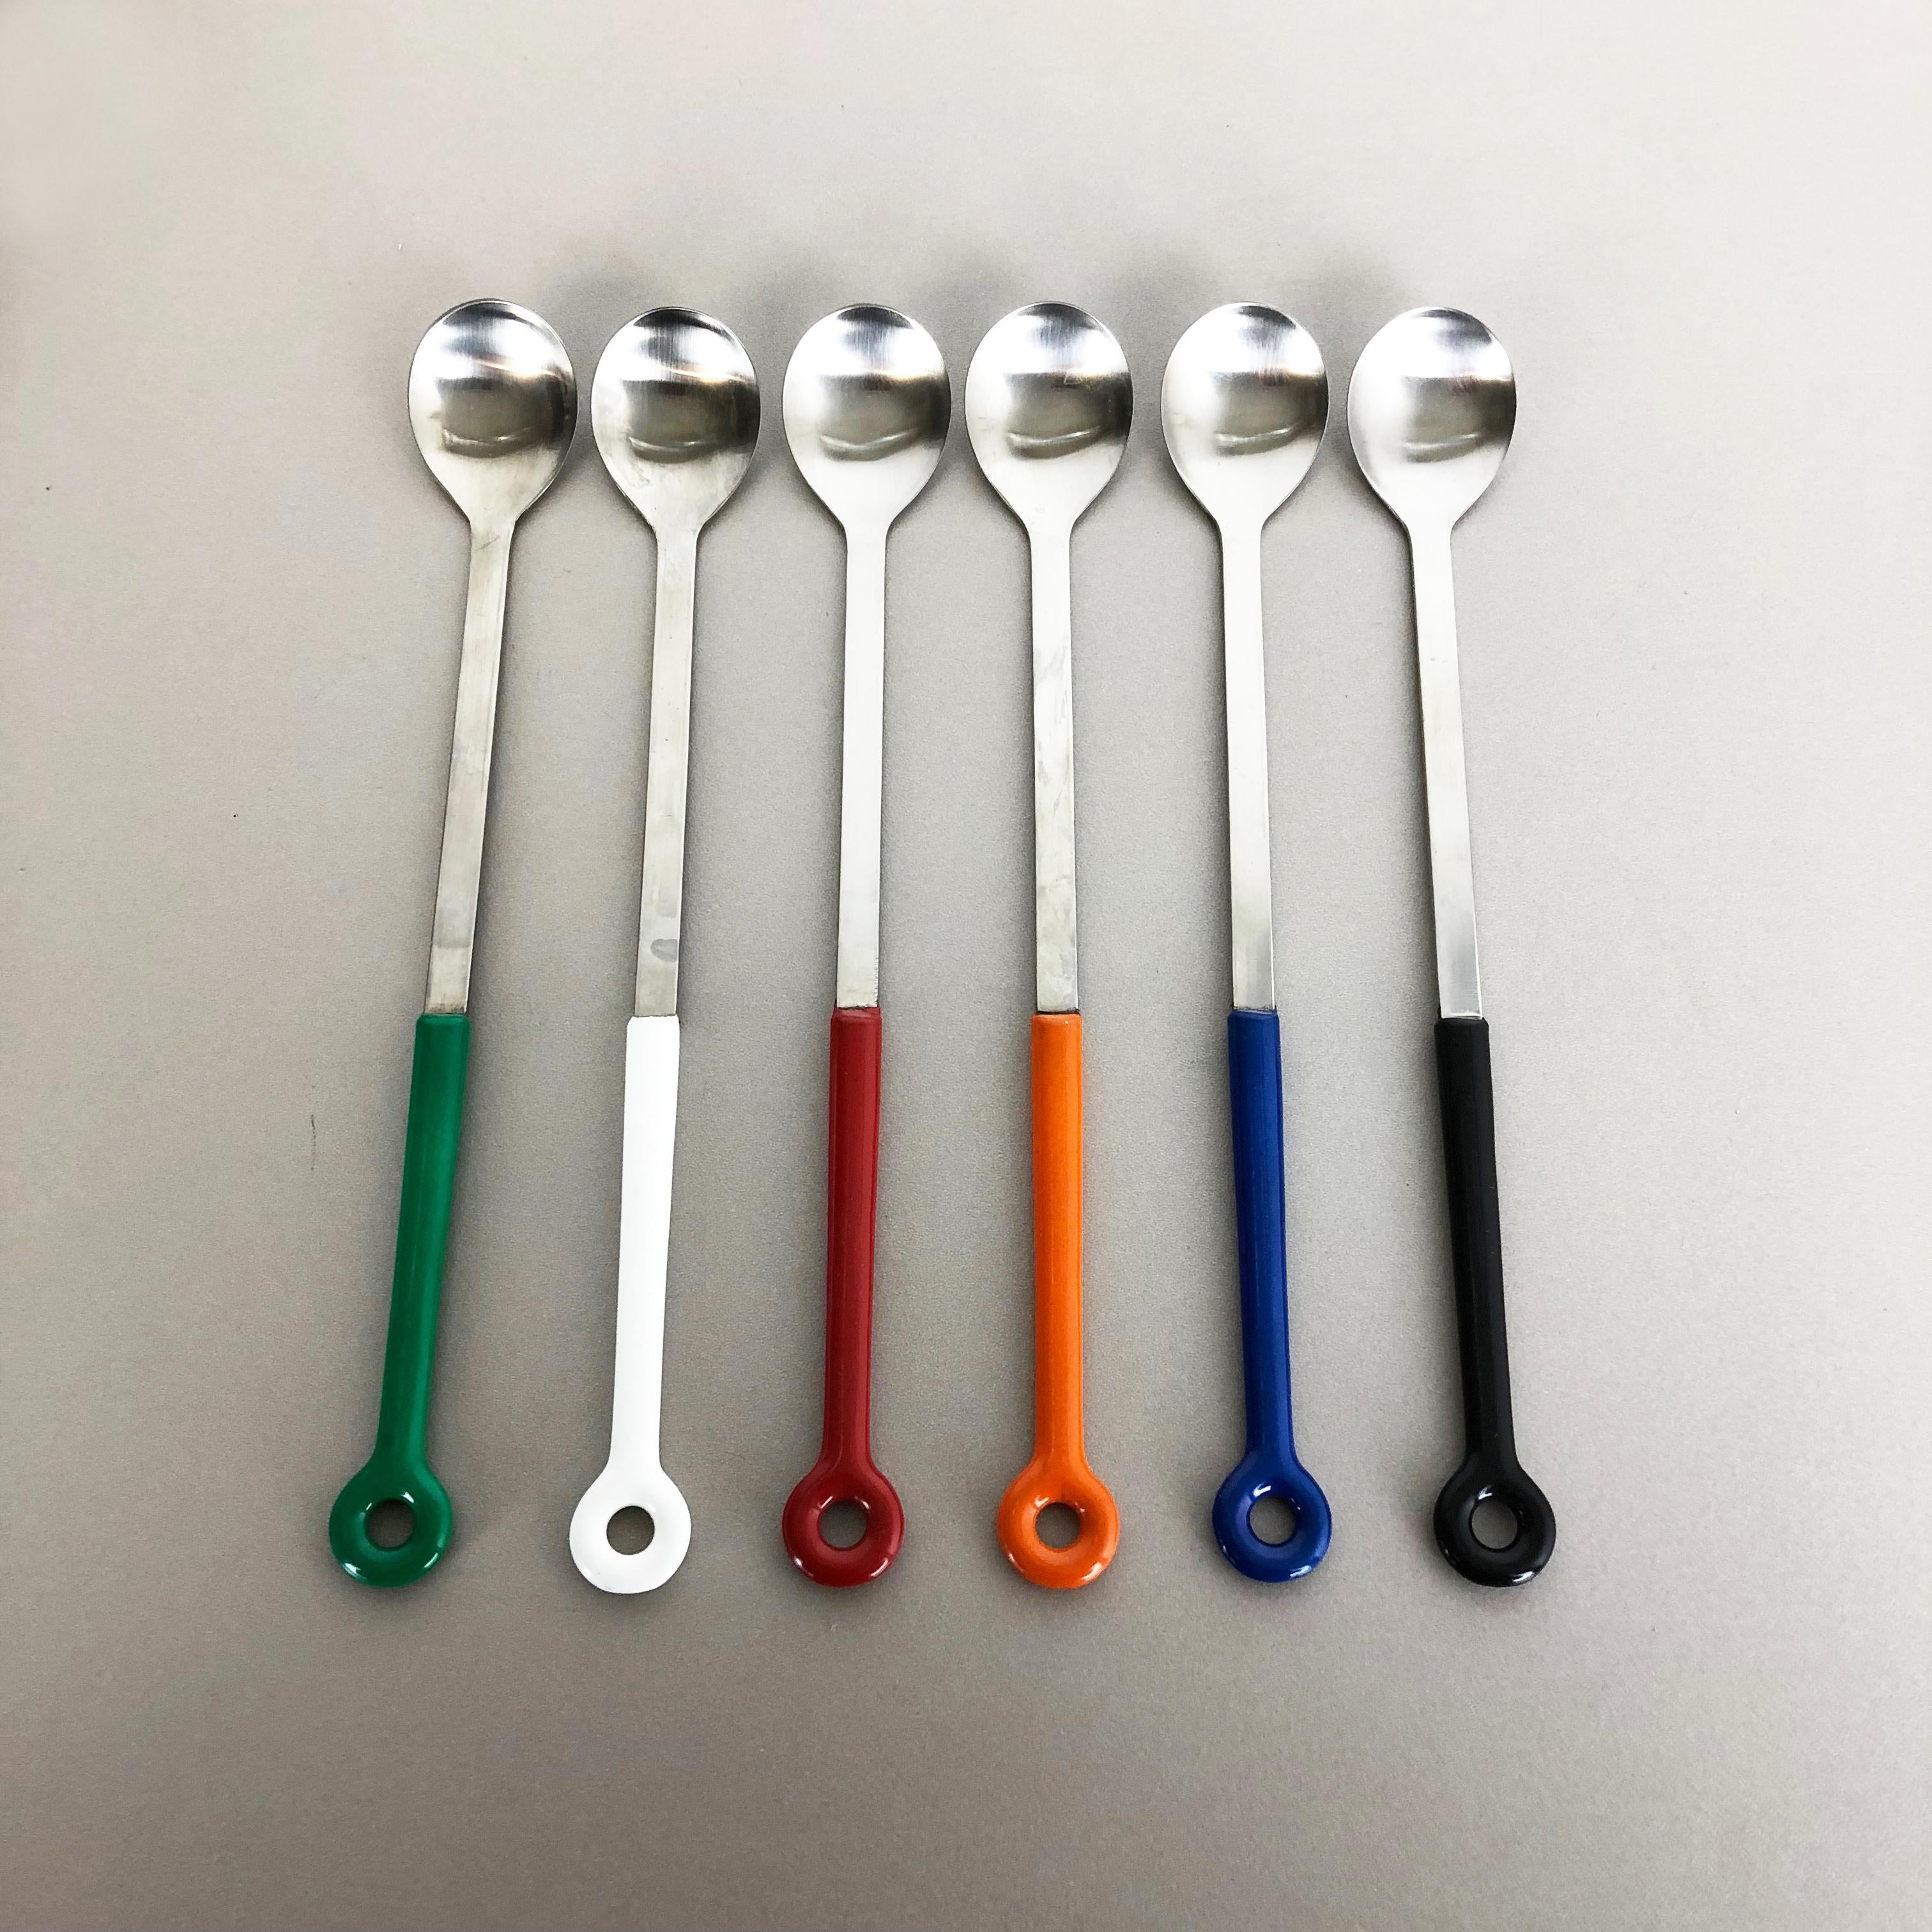 Article: Set of 6 spoons Mono Ring series



Producer: Mono, Germany



Designer: Peter Raacke


Age: 1960s



Description: 

Rare set of six spoons designed by Peter Raacke in 1962 and produced by Mono in Germany. This set is